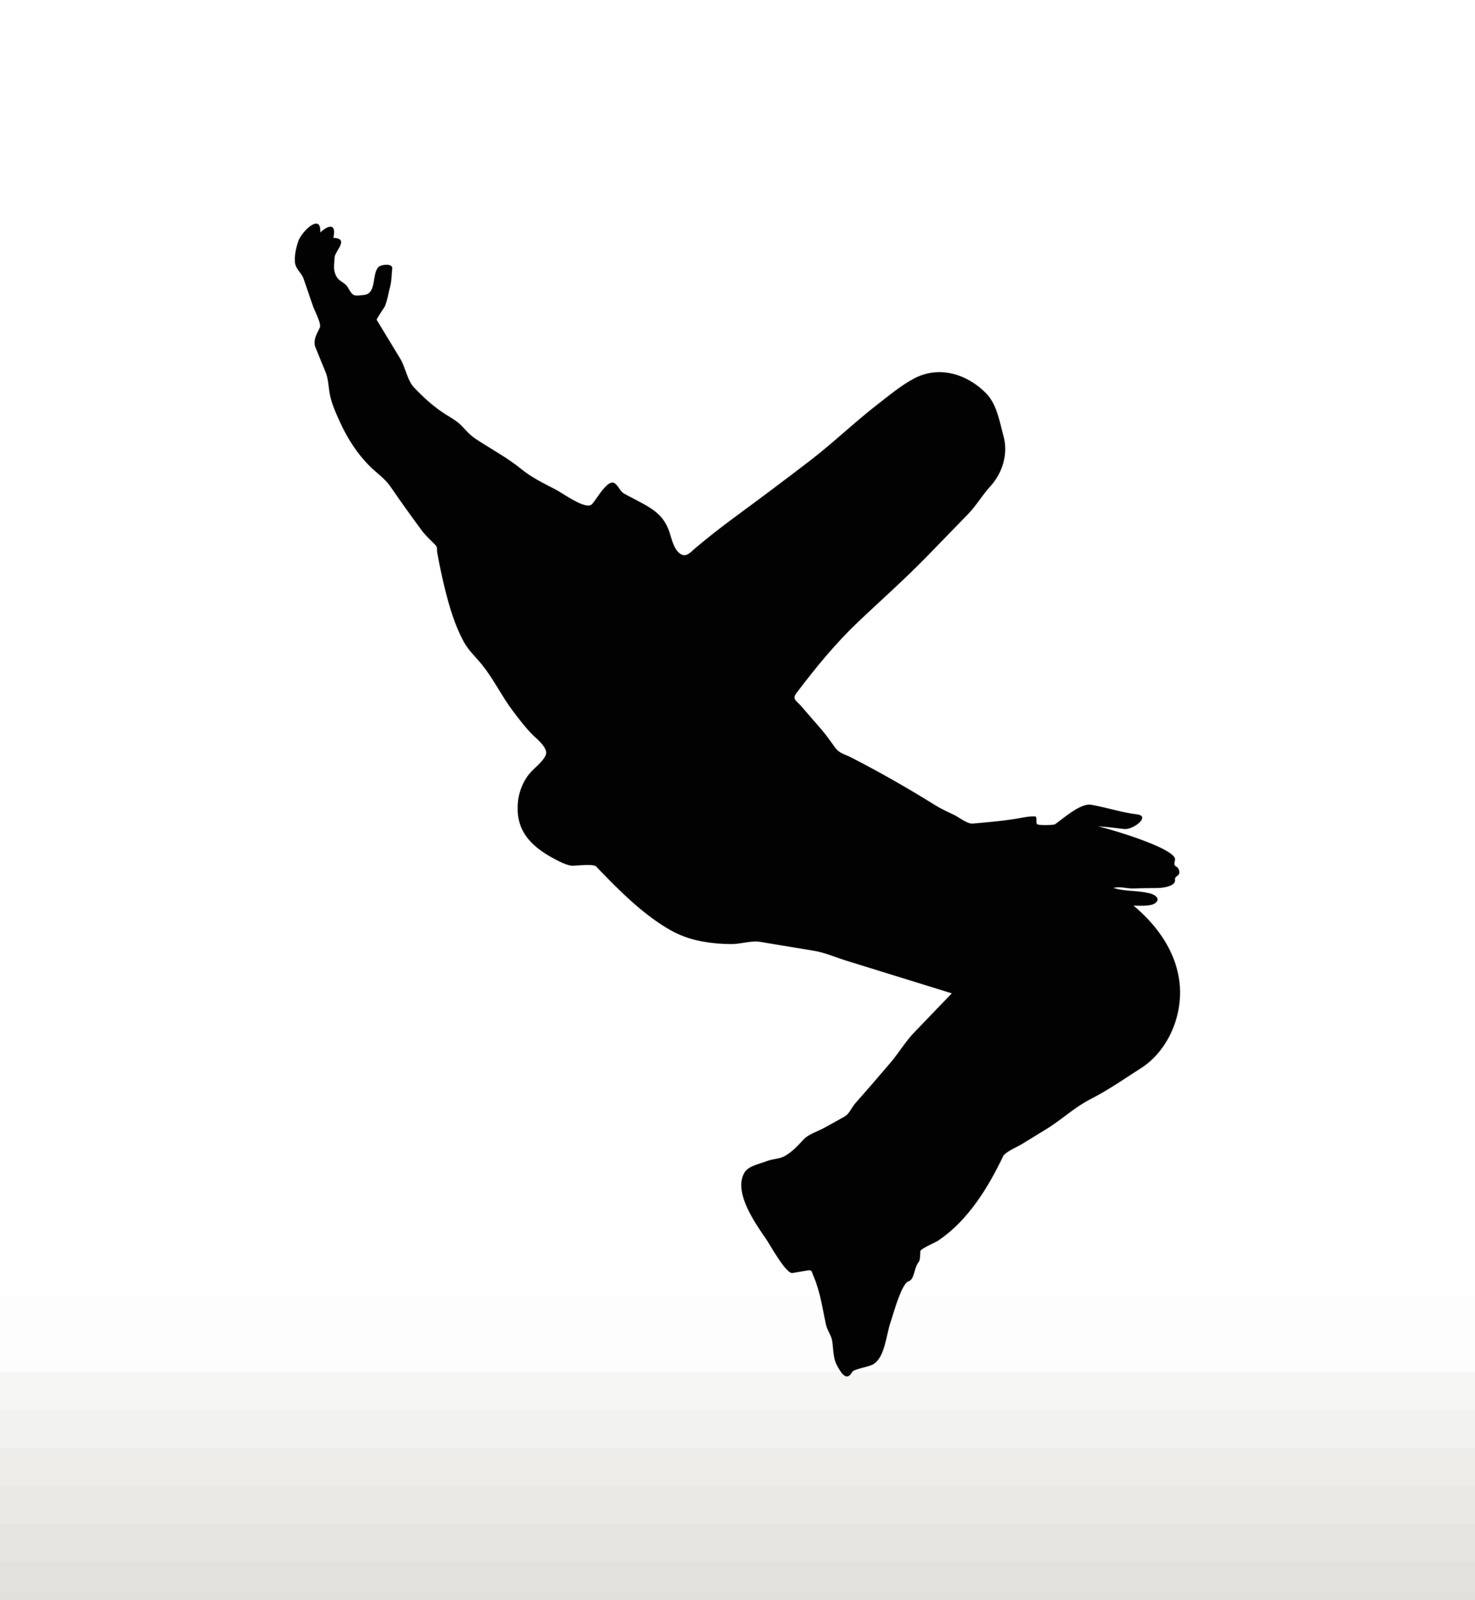 illustration in silhouette of businessman falling